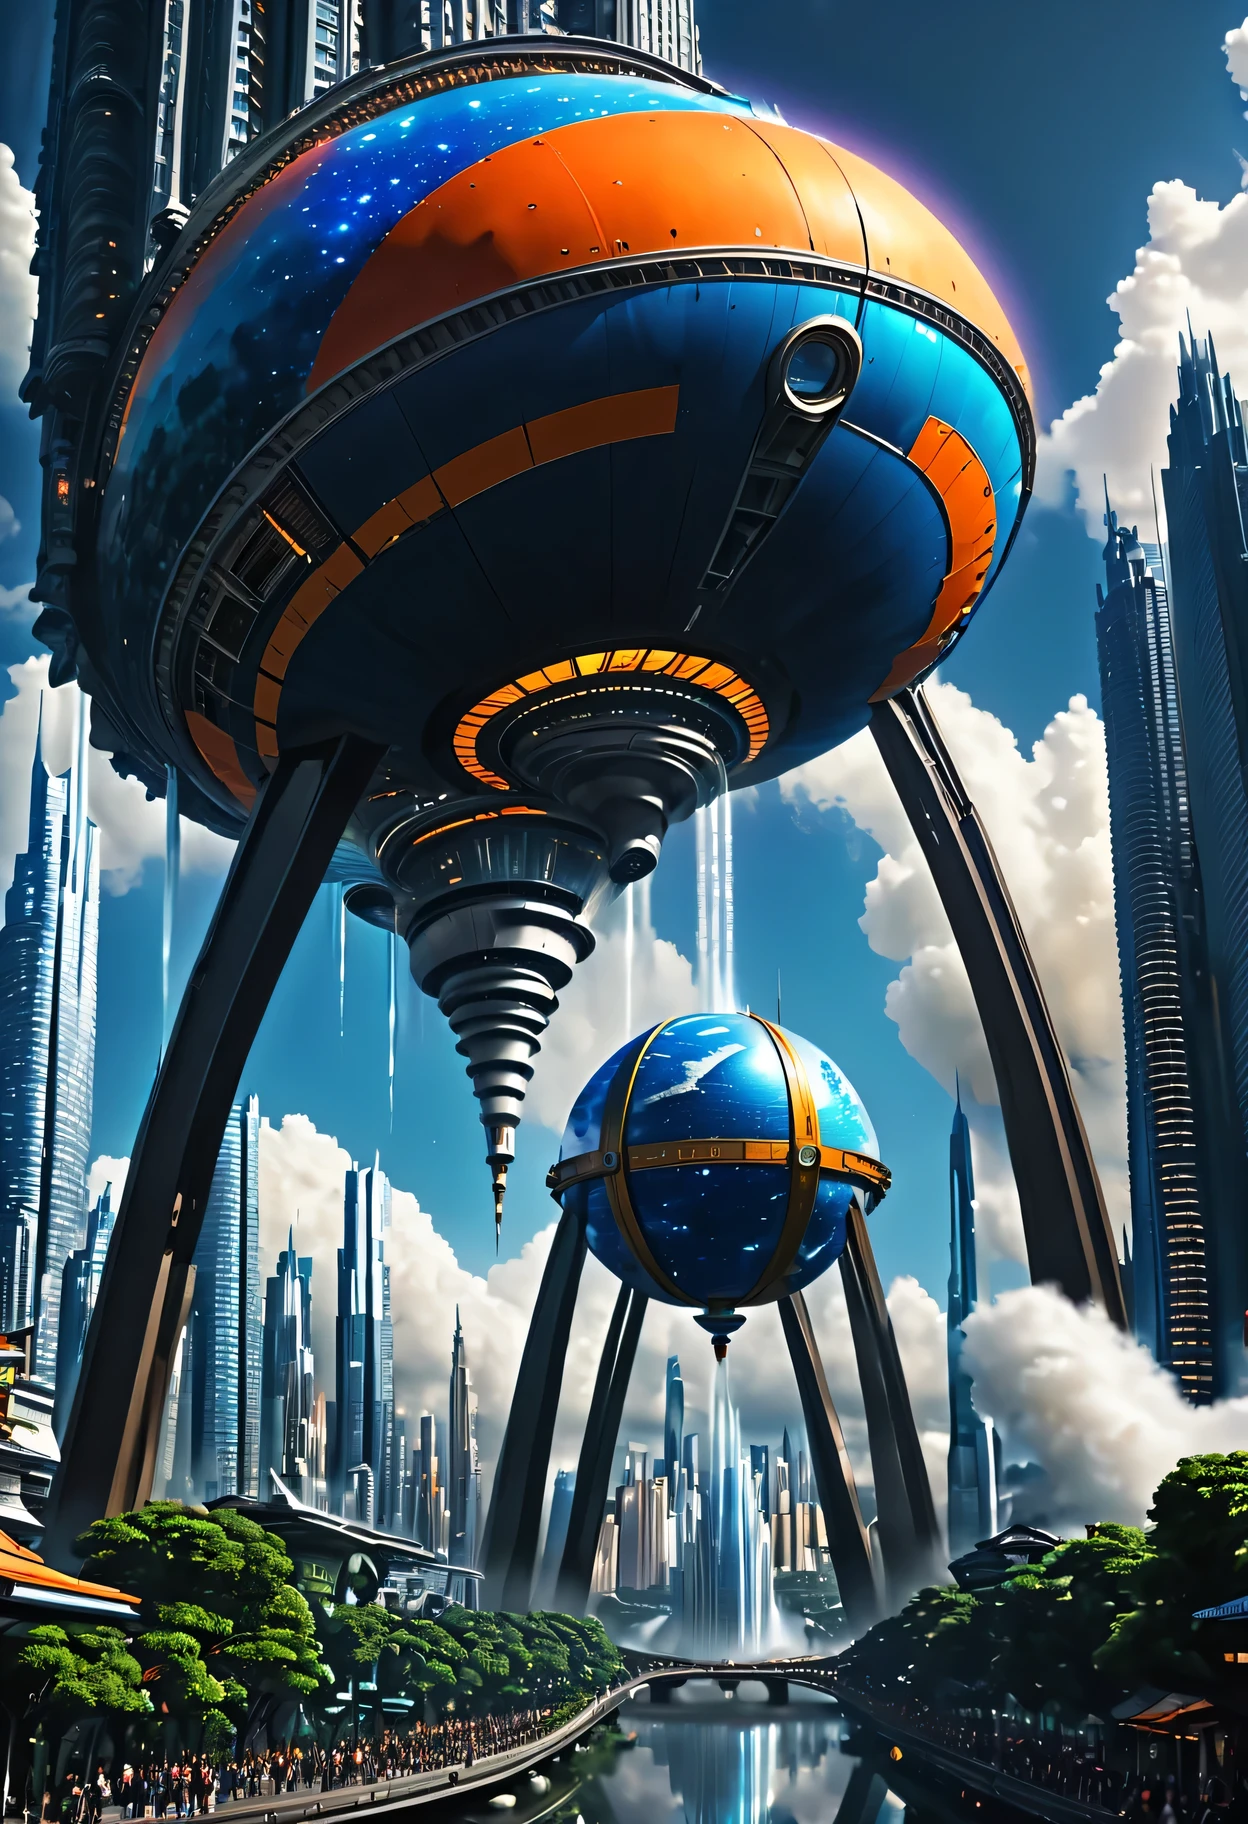 Space City、futuristic cities、floating in the universe、ＳＦart by，cyberpunked、The streets are lined with skyscrapers、A space station、Skyscrapers tall through the clouds，top-quality、​masterpiece、dream、utopian、planet earth、World of Dreams、Fantasia、𝓡𝓸𝓶𝓪𝓷𝓽𝓲𝓬、Beautiful city、Space City、A world far beyond human creation，There is a huge waterfall，